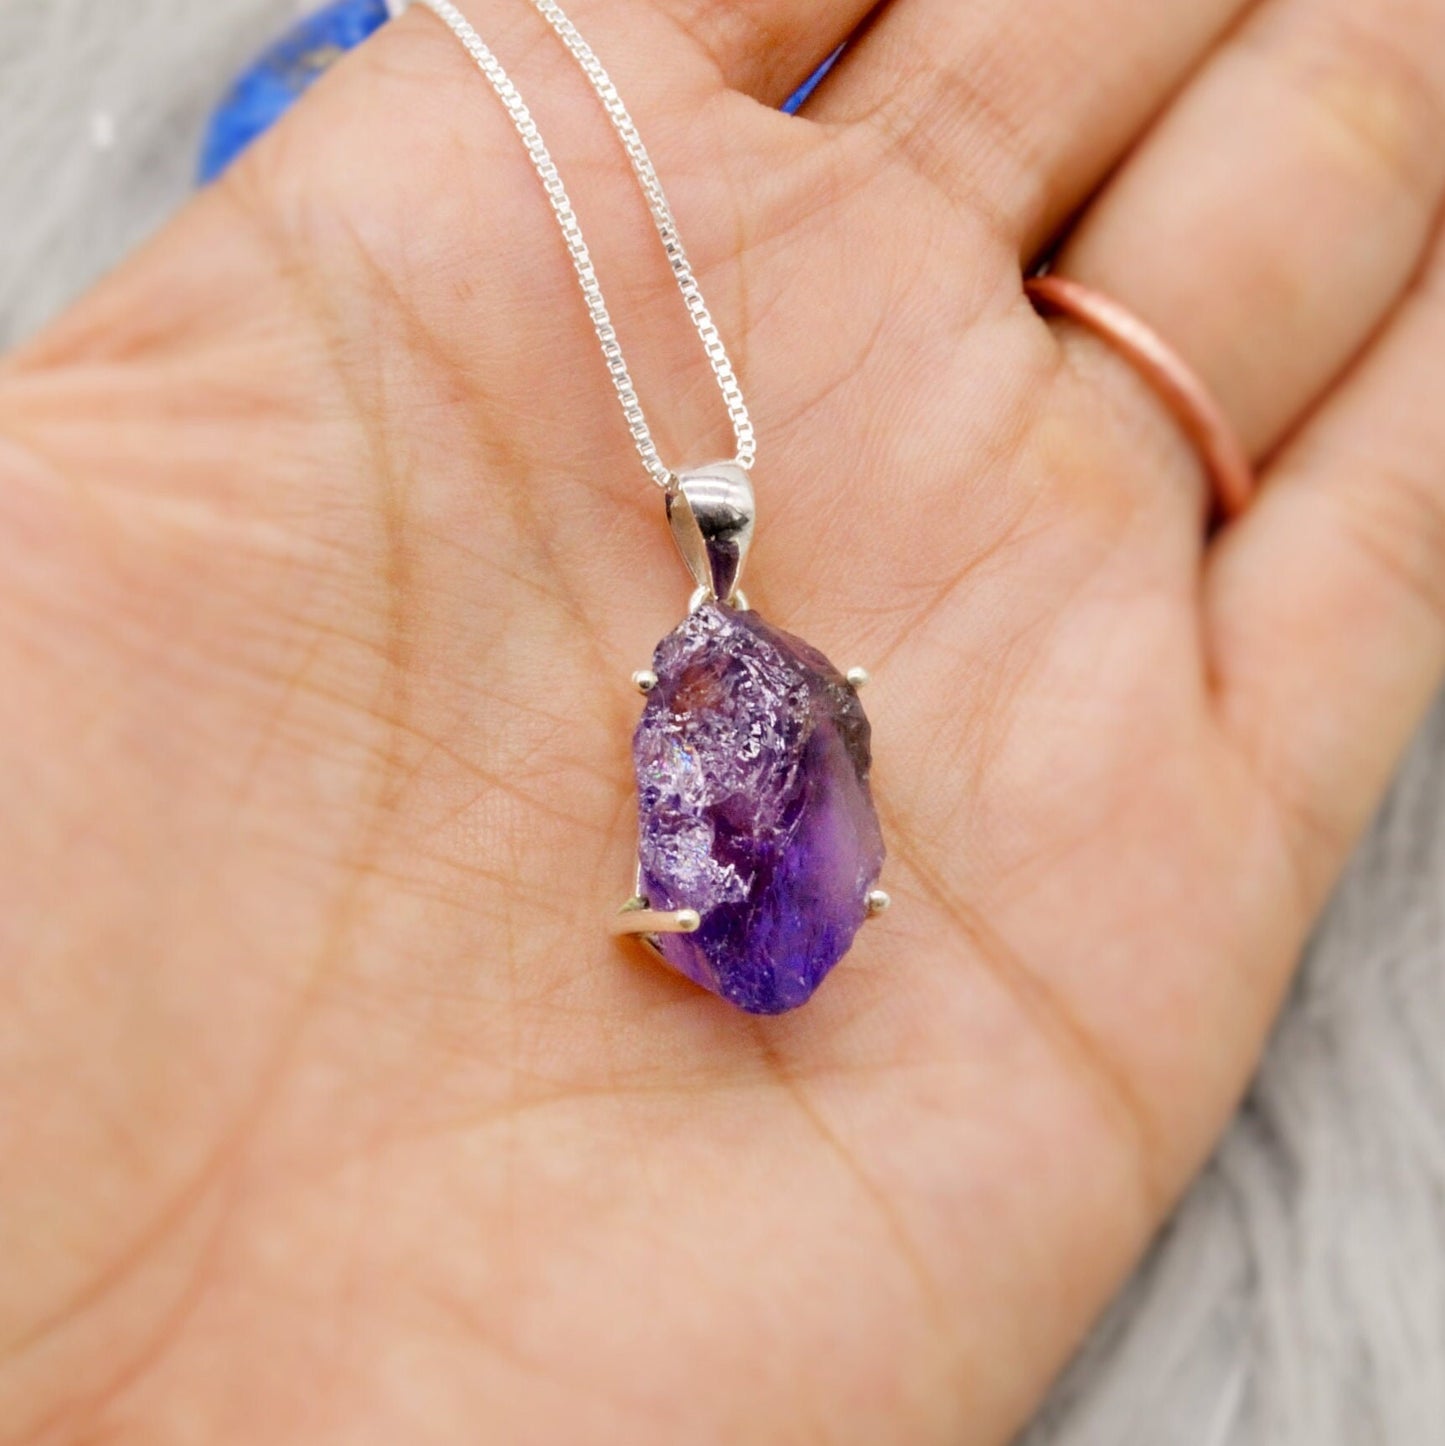 Raw Amethyst Chain Pendant Necklace, Rough Cut Amethyst Necklace, February Birthstone, Raw Gemstone, Sterling Silver, Birthday Gifts For Her